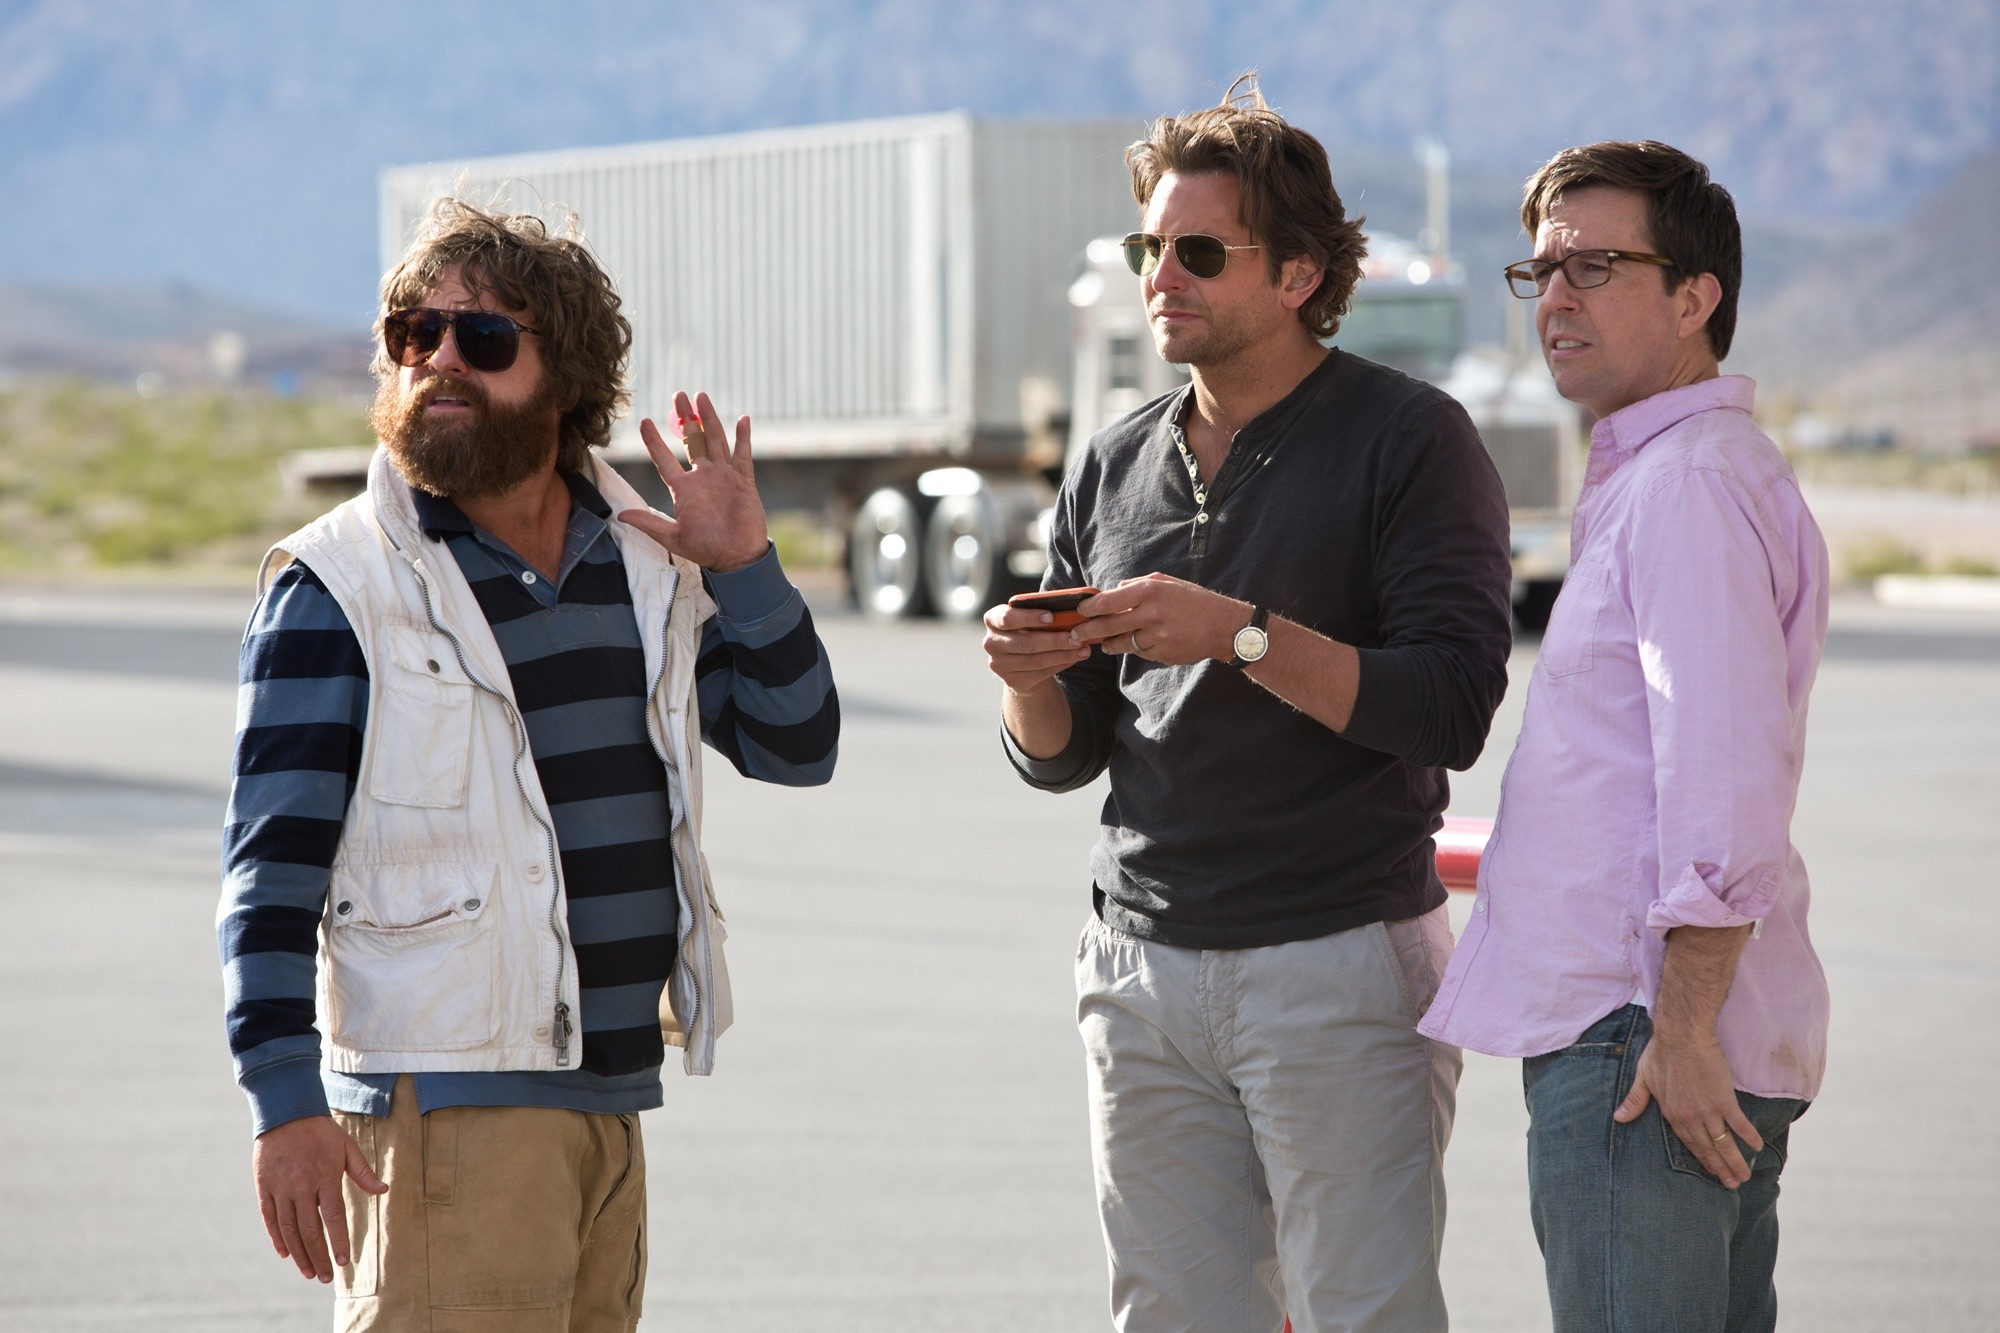 Zach Galifianakis, Bradley Cooper and Ed Helms in Warner Bros. Pictures' The Hangover Part III (2013)